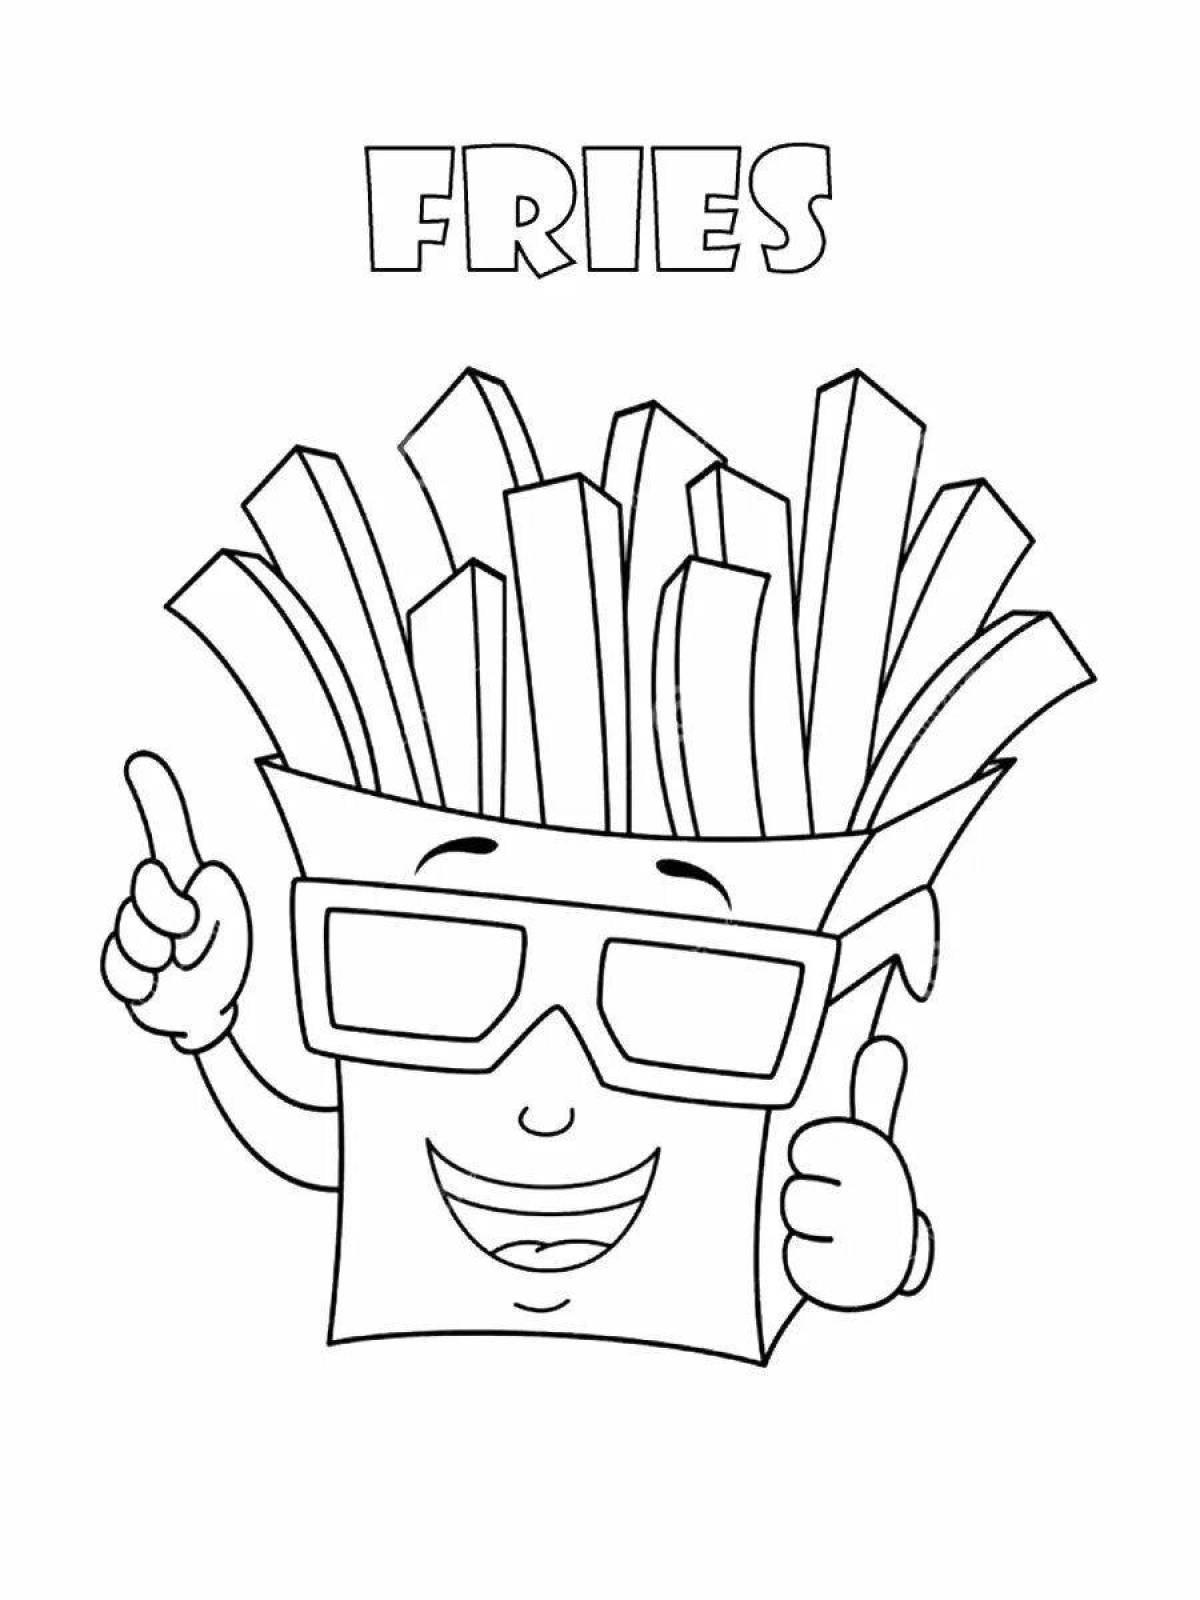 Colorful french fries coloring page